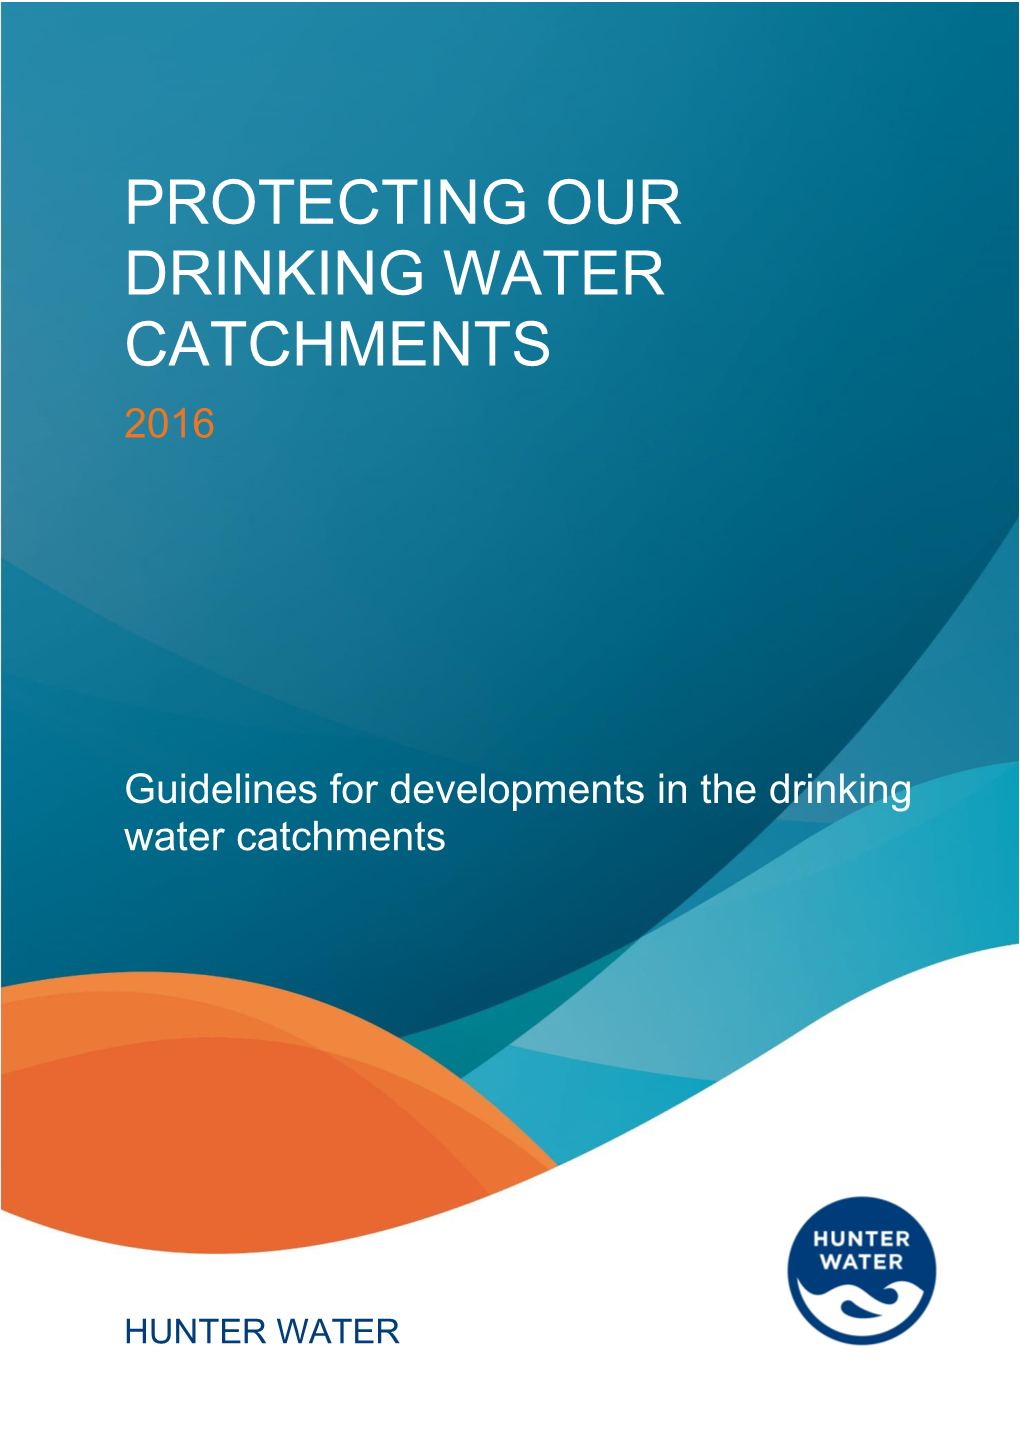 Protecting Our Drinking Water Catchments 2016